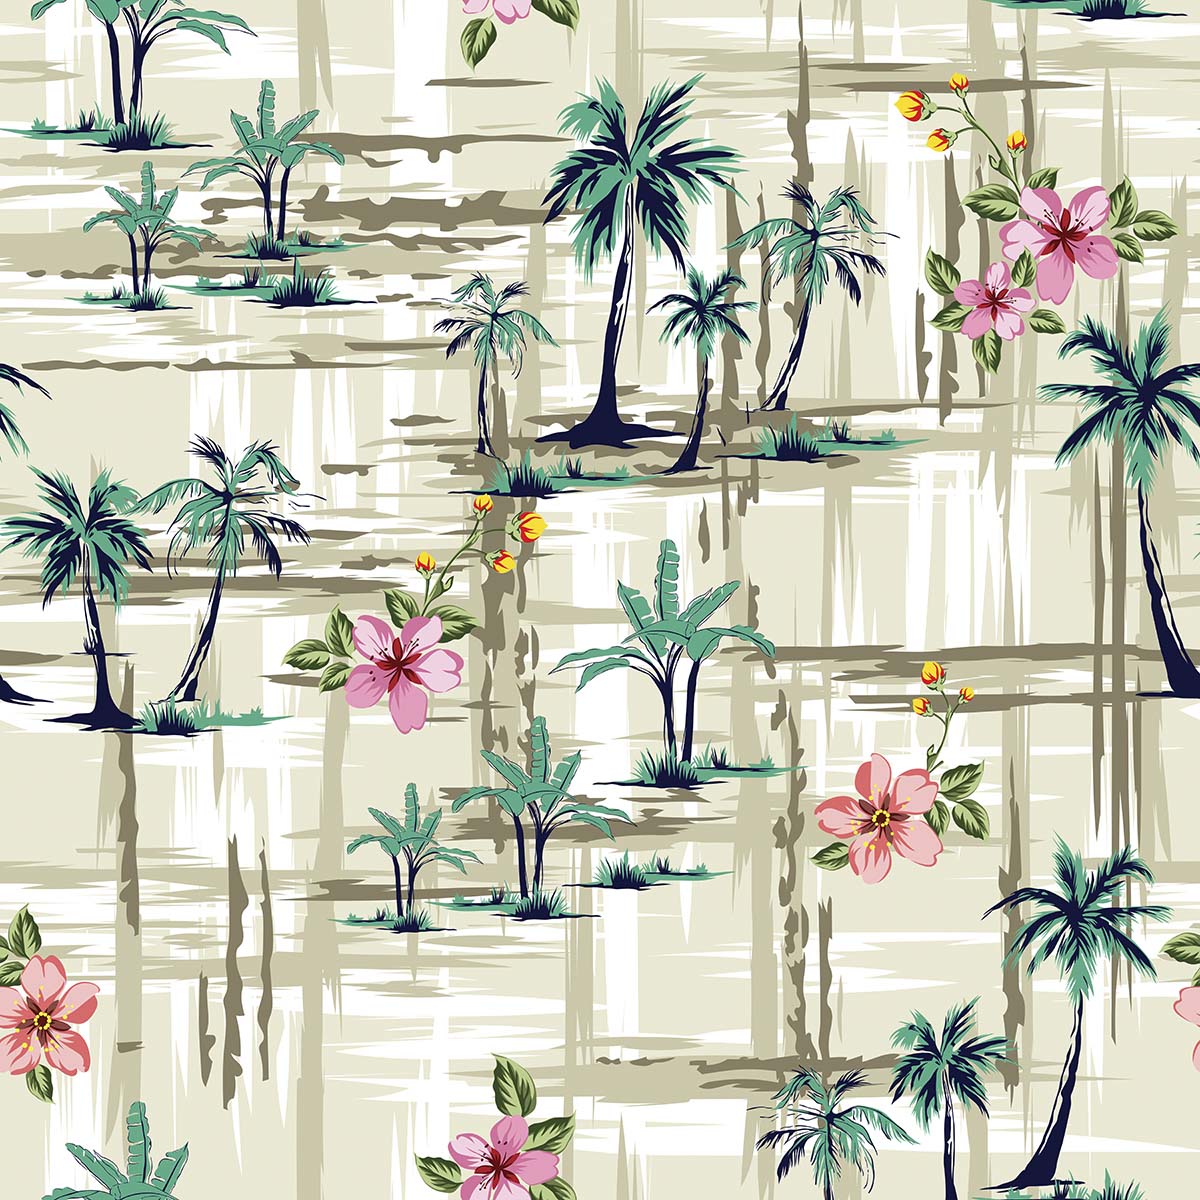 A pattern of palm trees and flowers